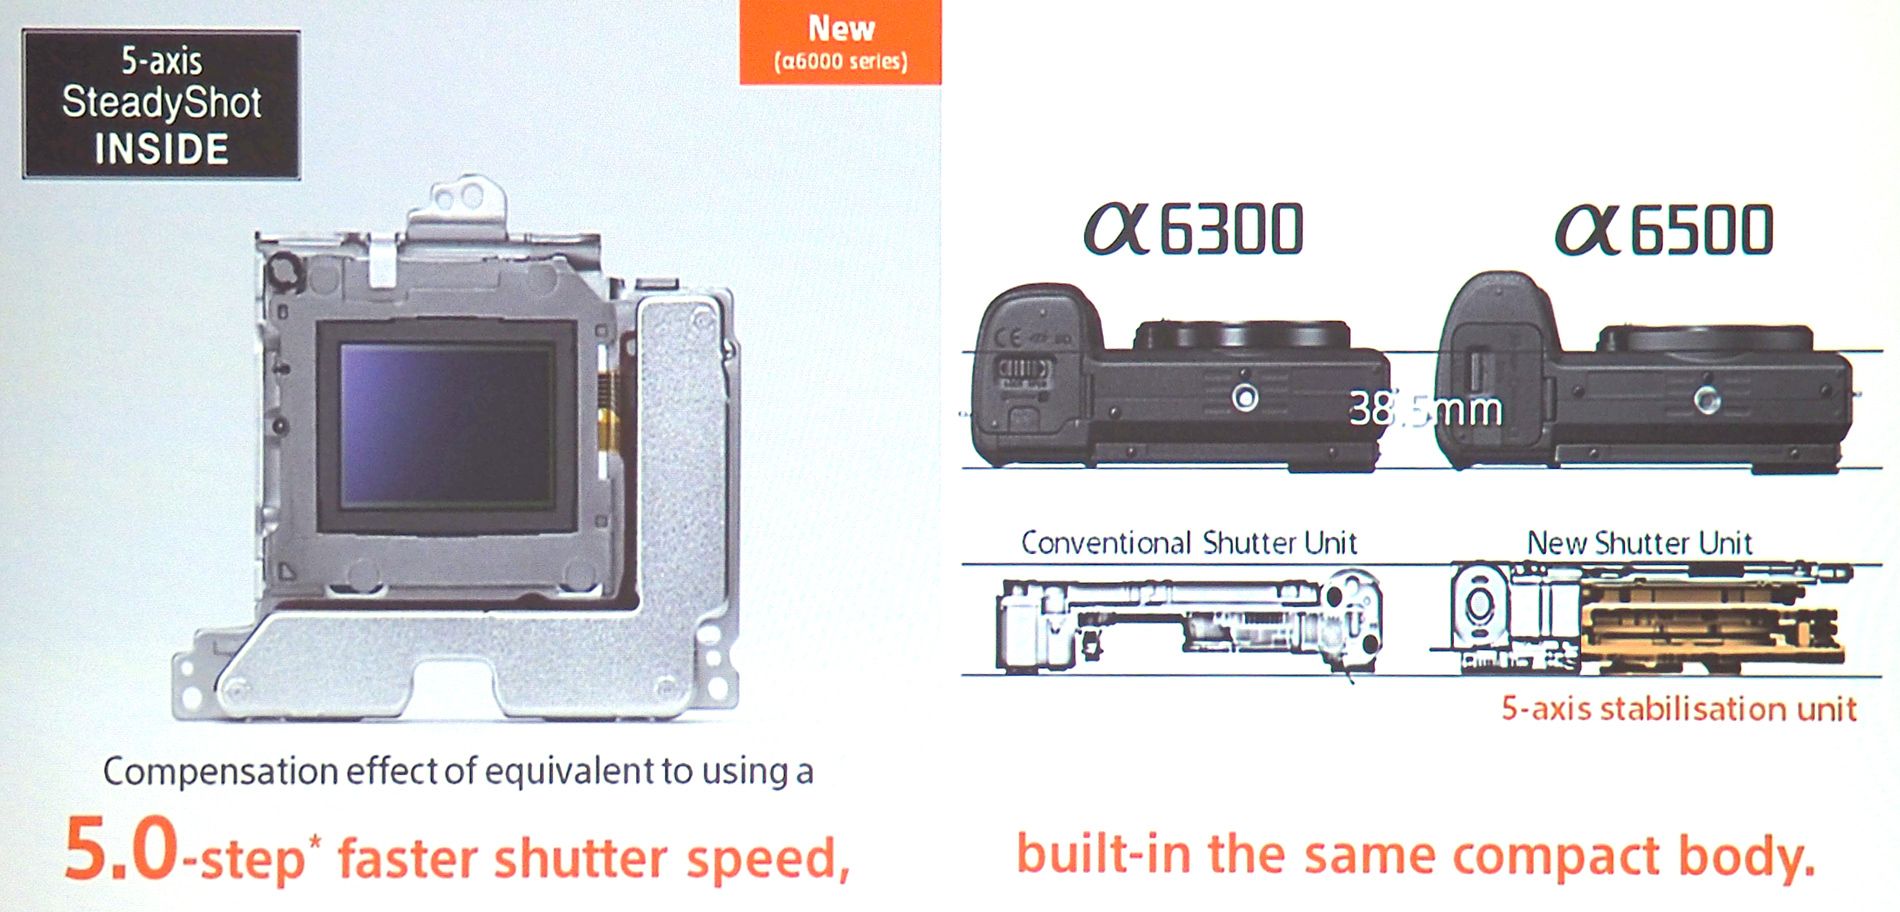 Highres A6500 New Shutter Unit and 5 Axis Is 1476438450